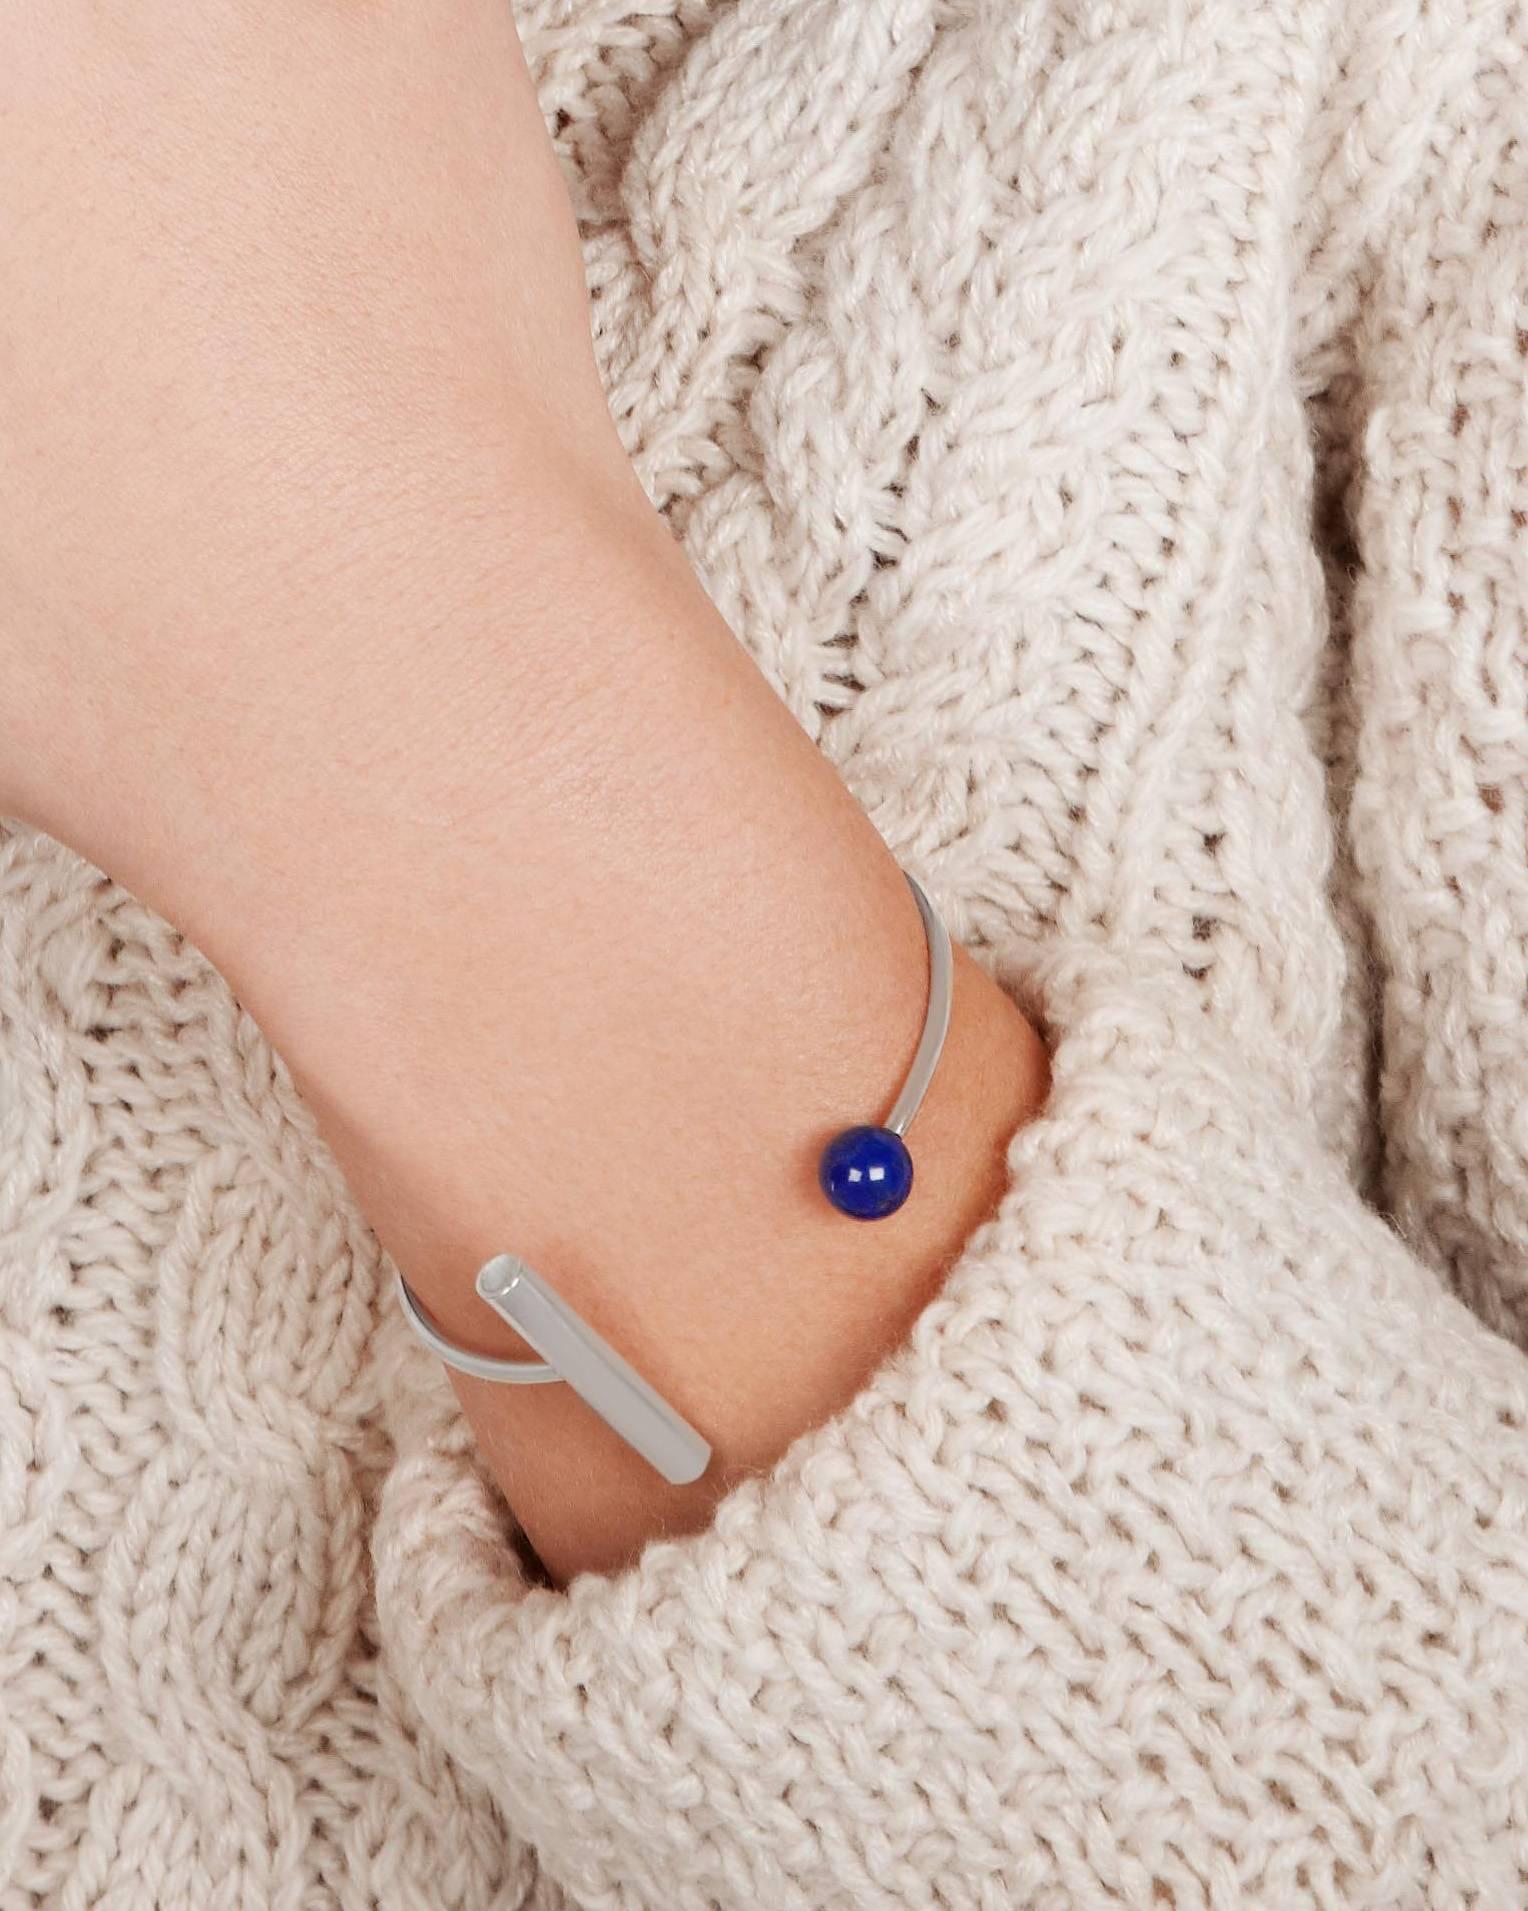 This cuff bracelet features a geometric design and is handcrafted in sterling silver with natural lapis lazuli.  The bracelet is slightly flexible allowing for a customisable fit for the wearer. 

Handmade in London.  Hallmarked 925 Allison Bryan